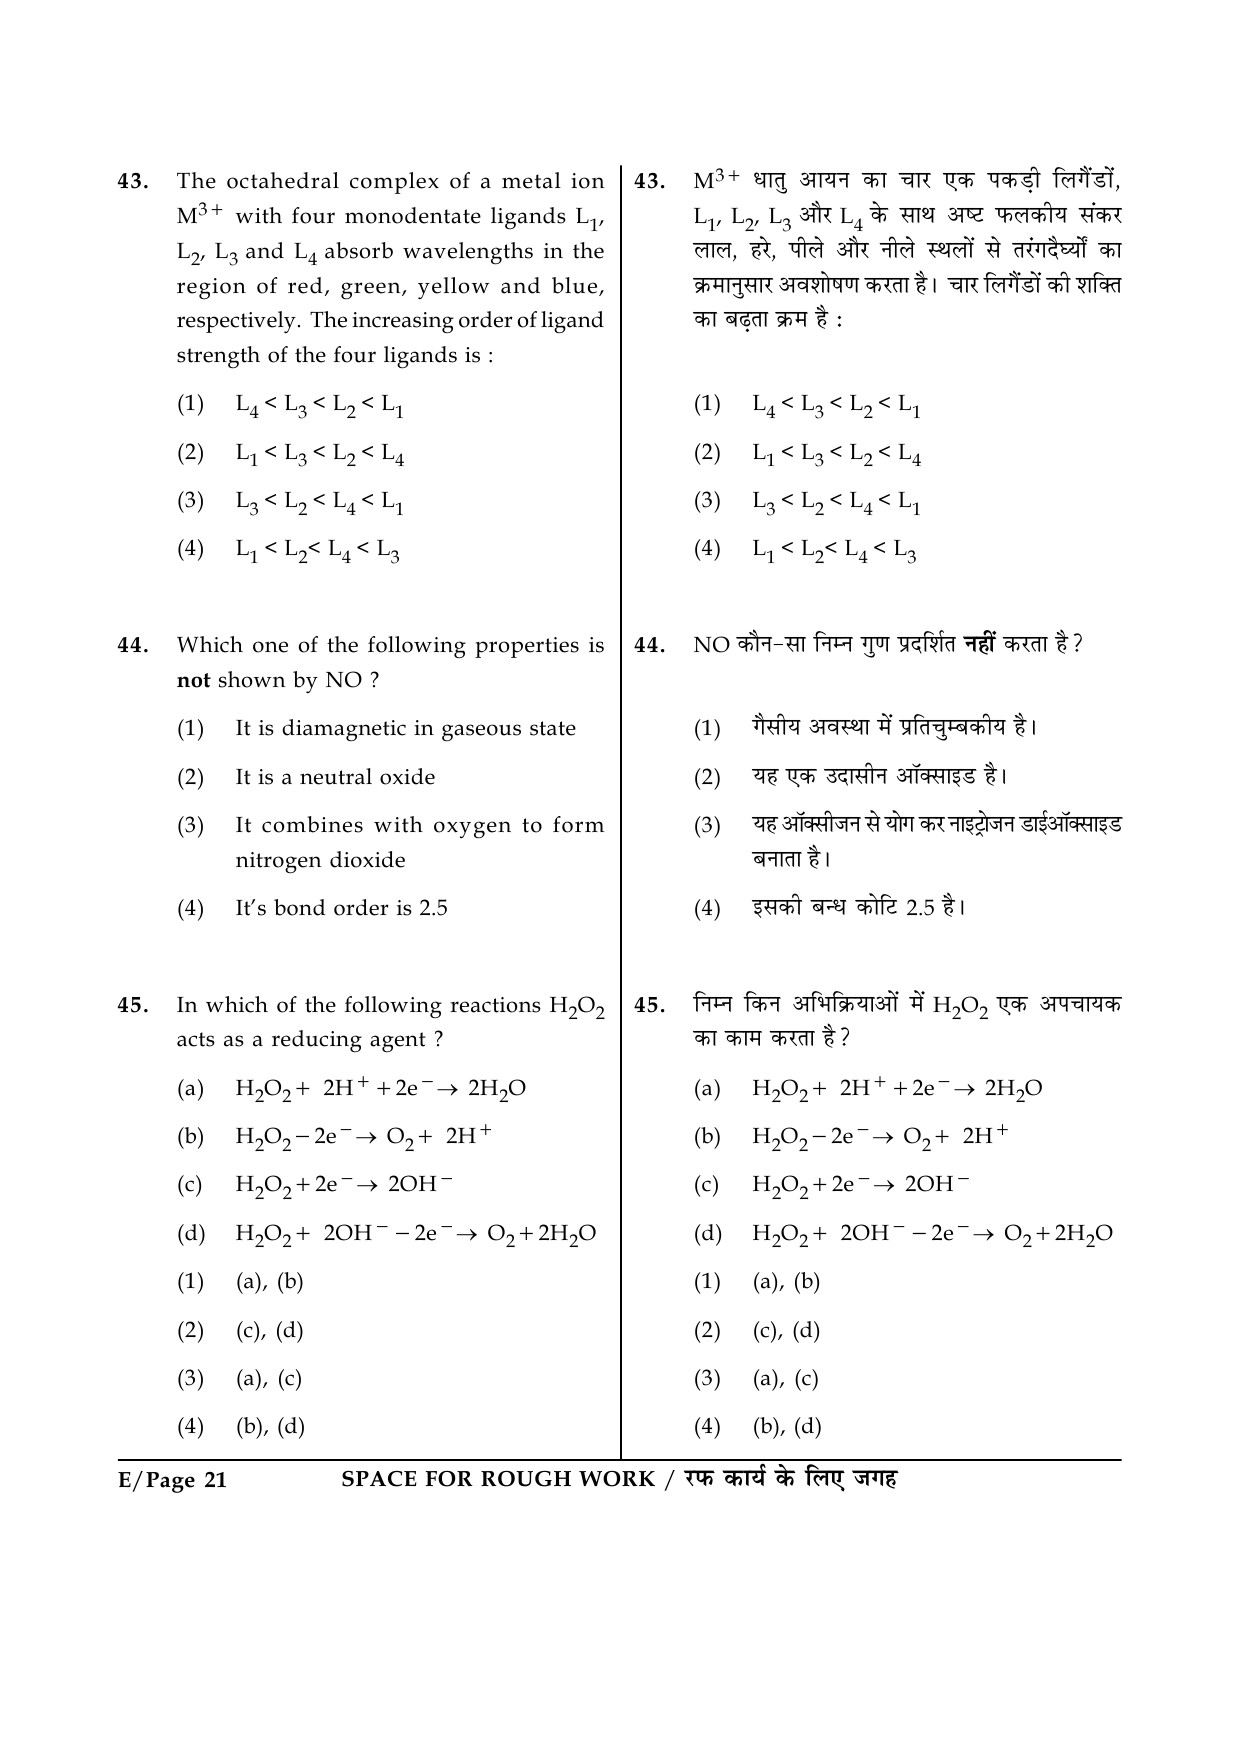 JEE Main Exam Question Paper 2014 Booklet E 21